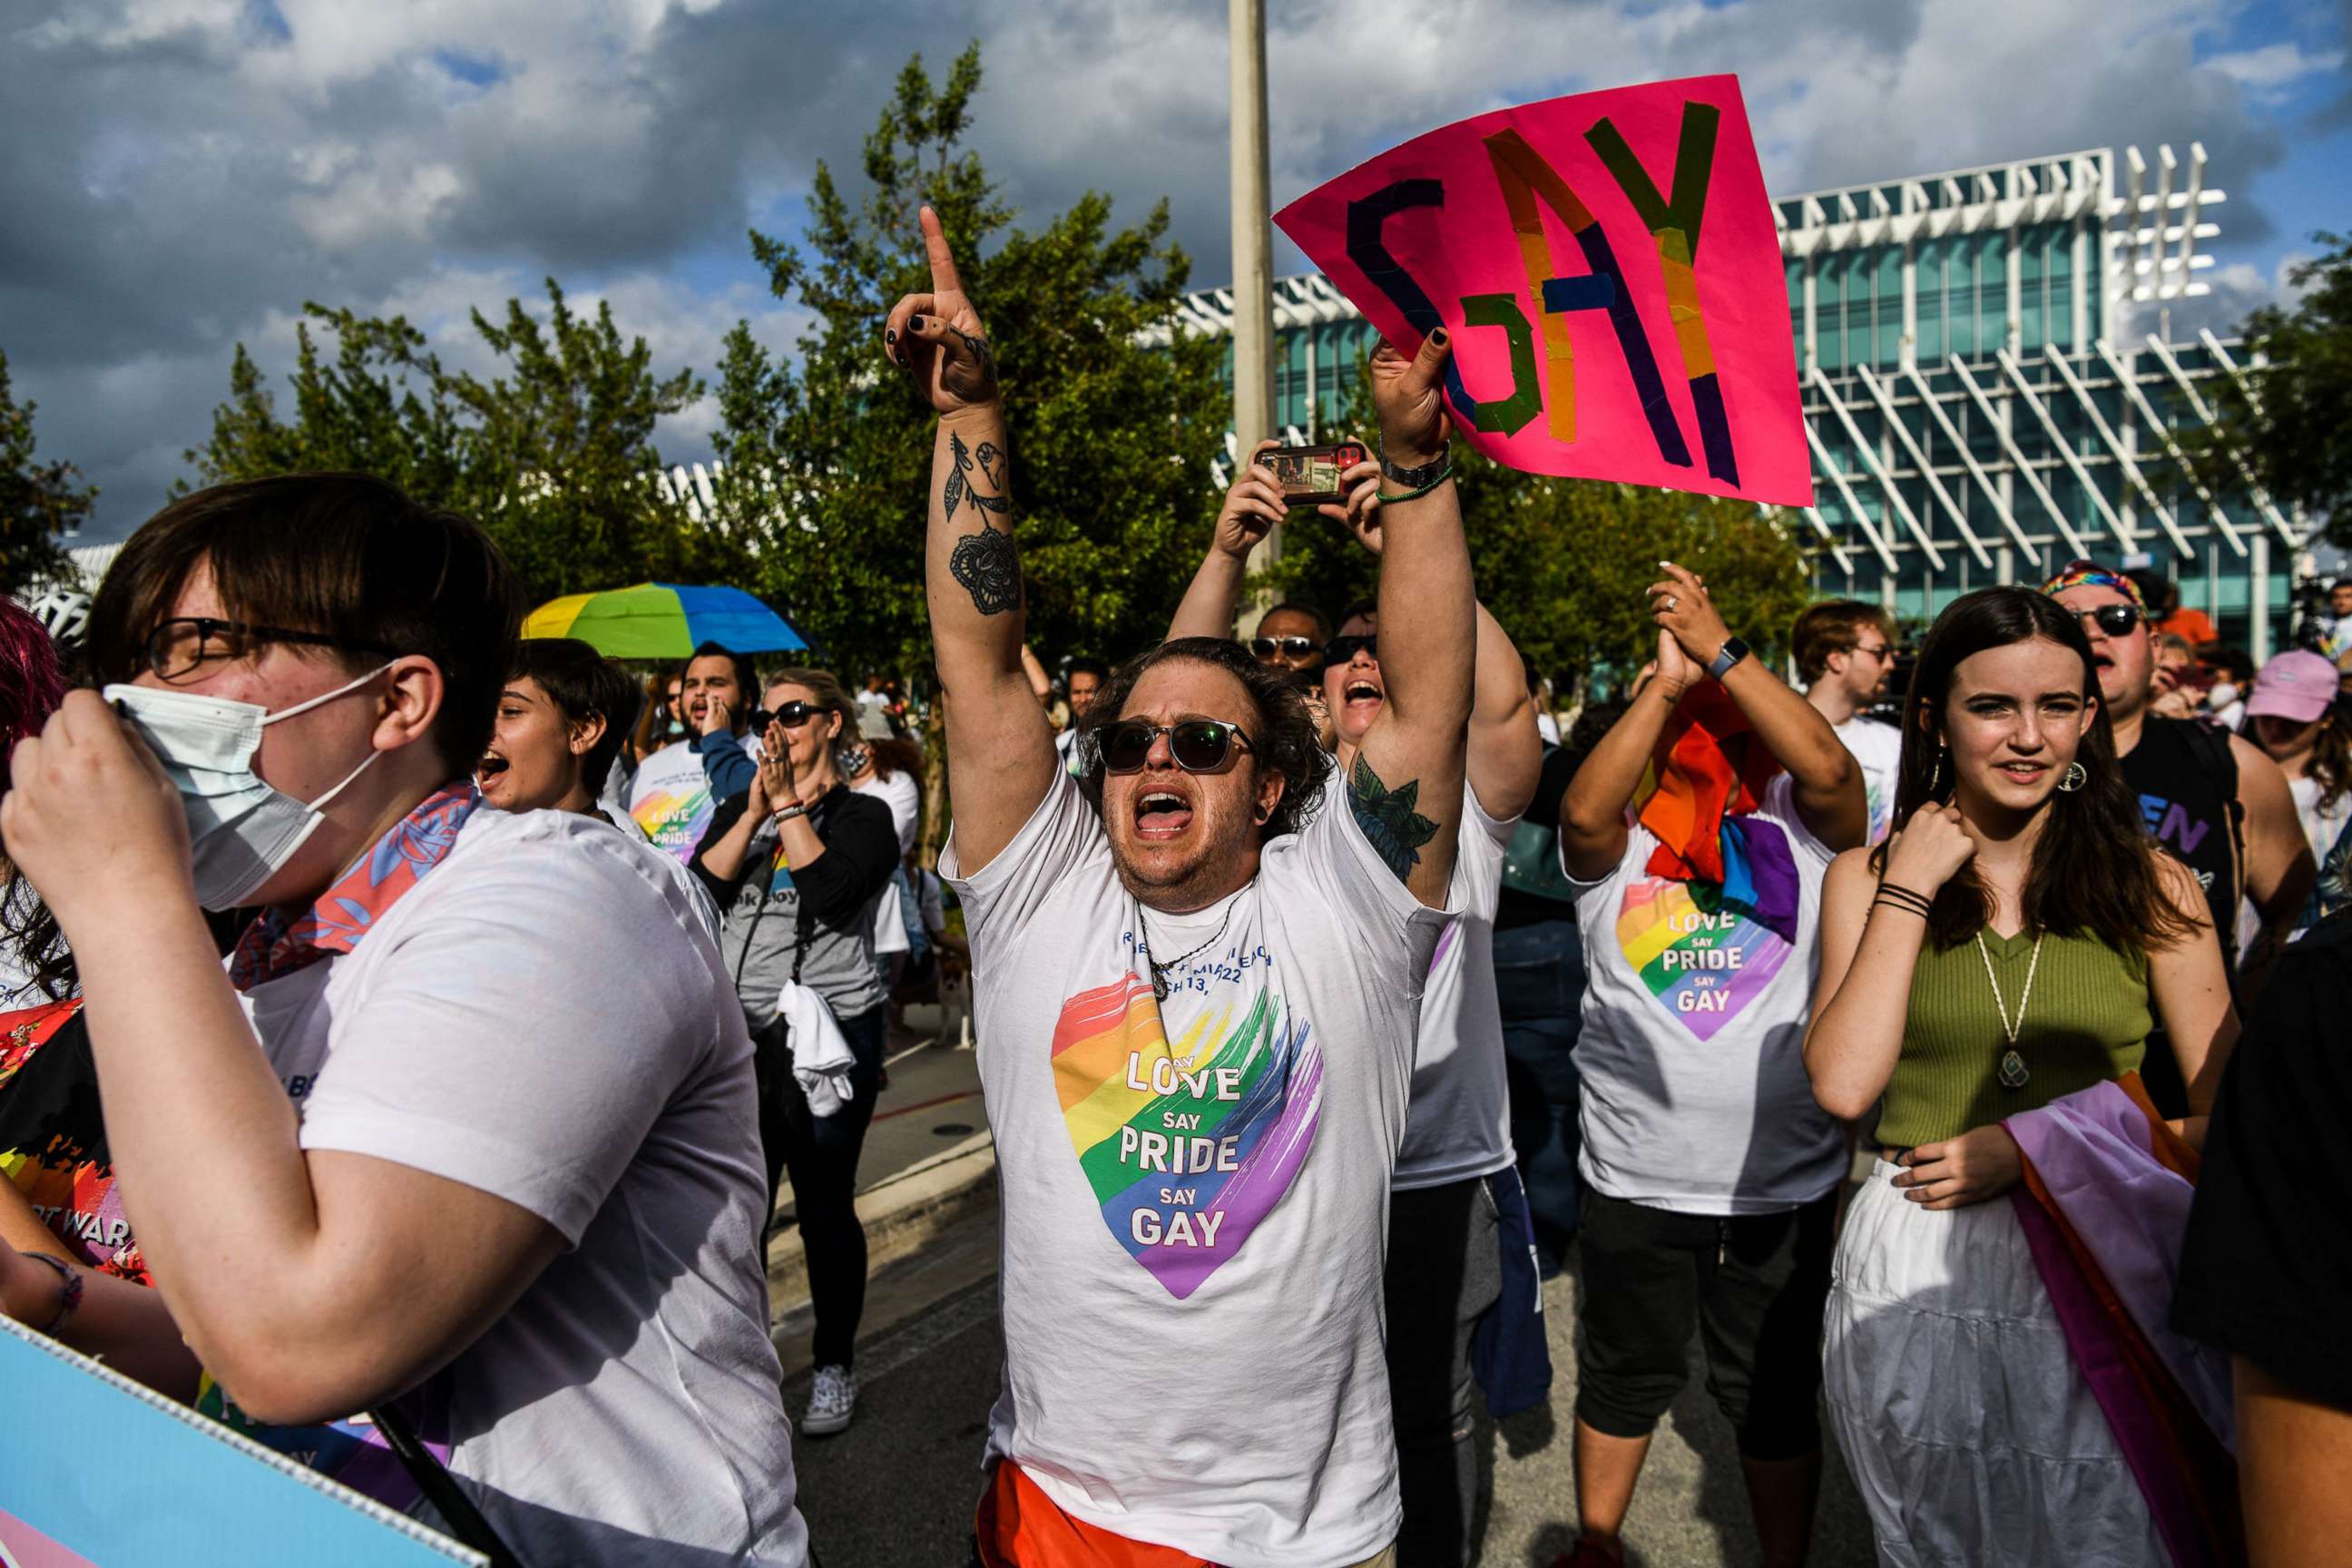 PHOTO: Members and supporters of the LGBTQ community attend the "Say Gay Anyway" rally in Miami Beach, Fla., March 13, 2022.